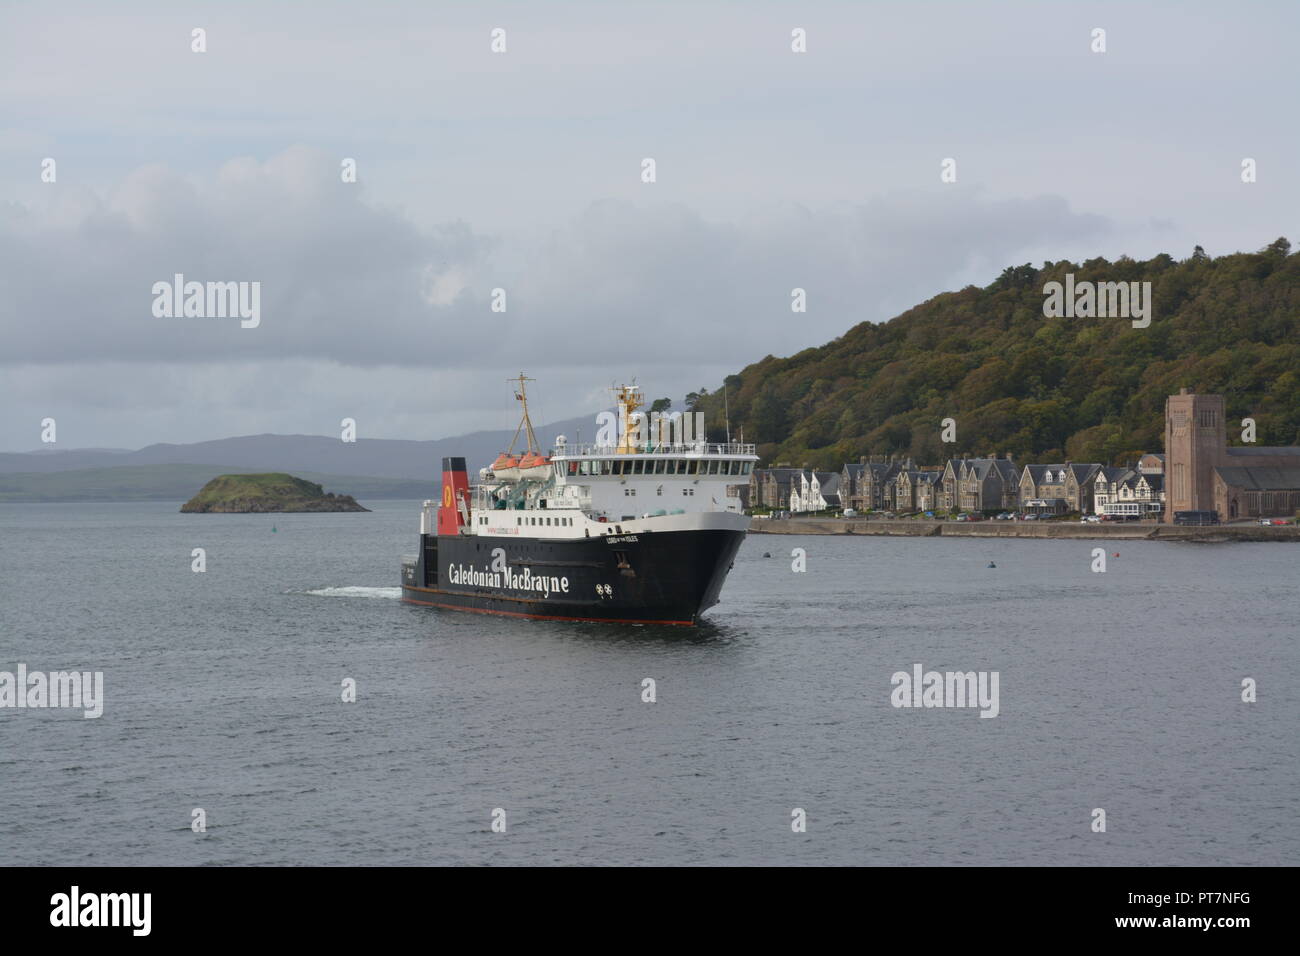 Caledonian MacBrayne ferry coming into dock at Oban West Coast of Scotland re island hopping vacations holidays method of sea travel Stock Photo